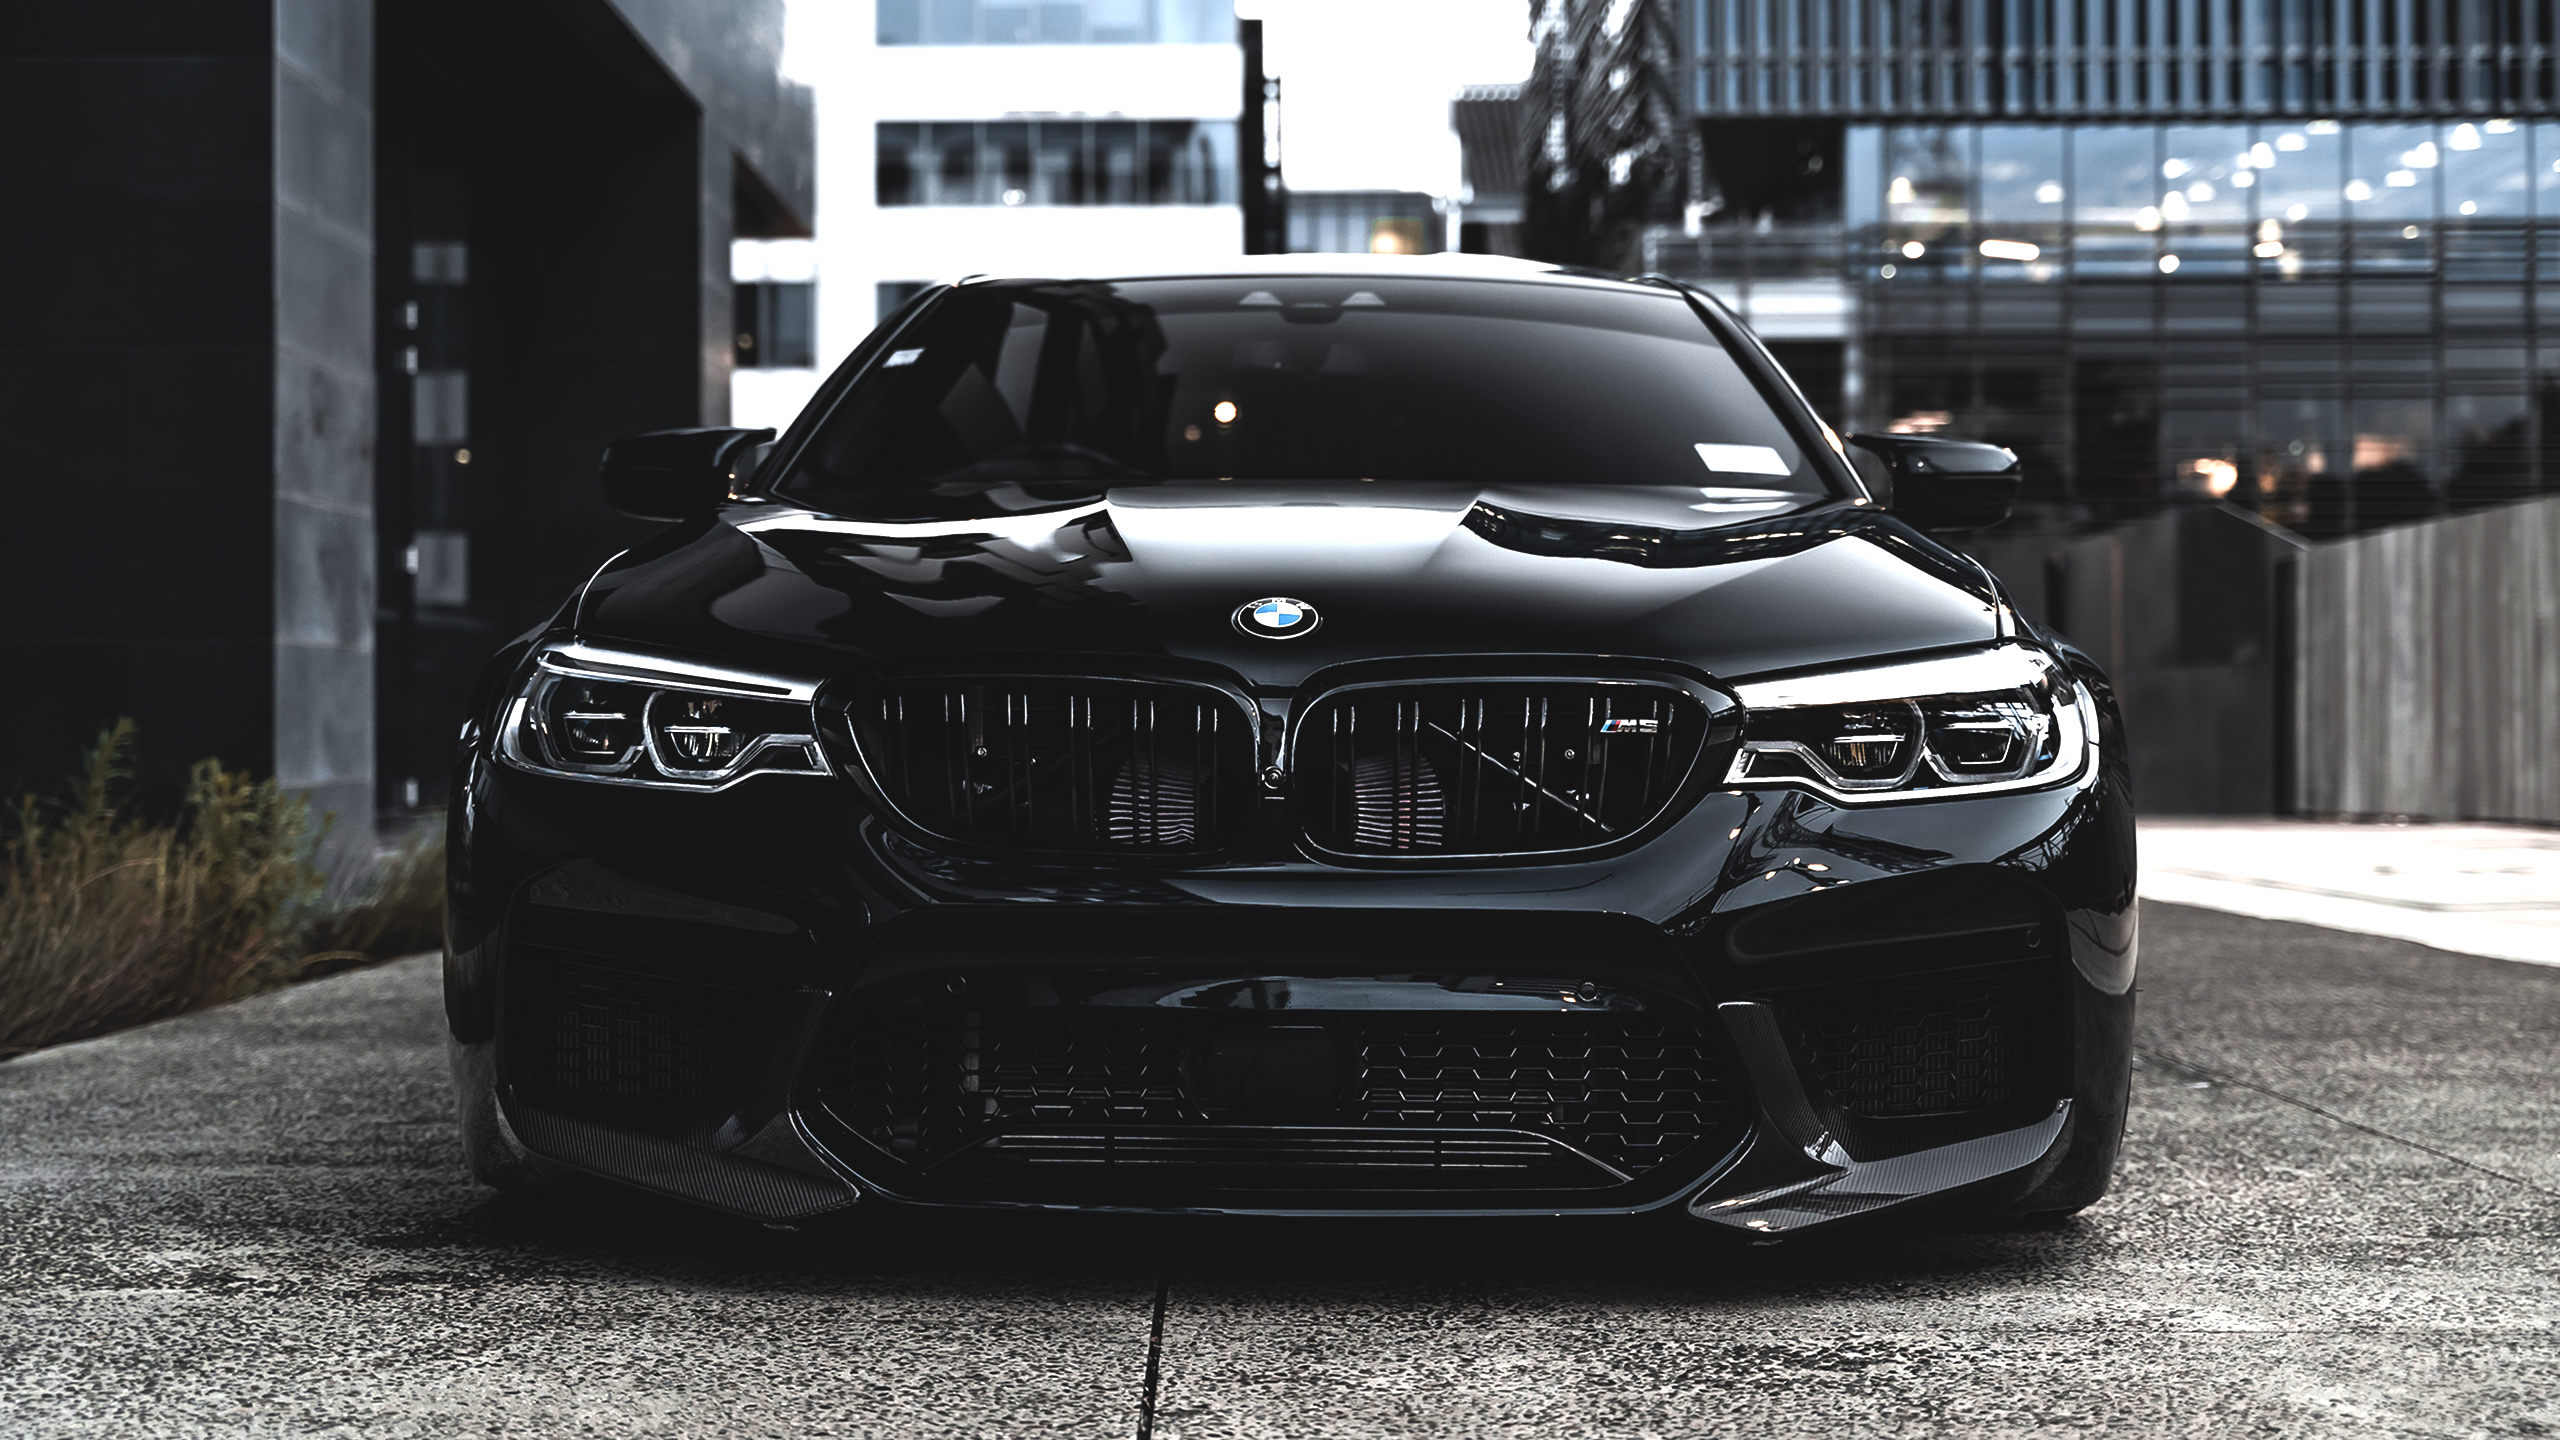 BMW M5 Wallpapers